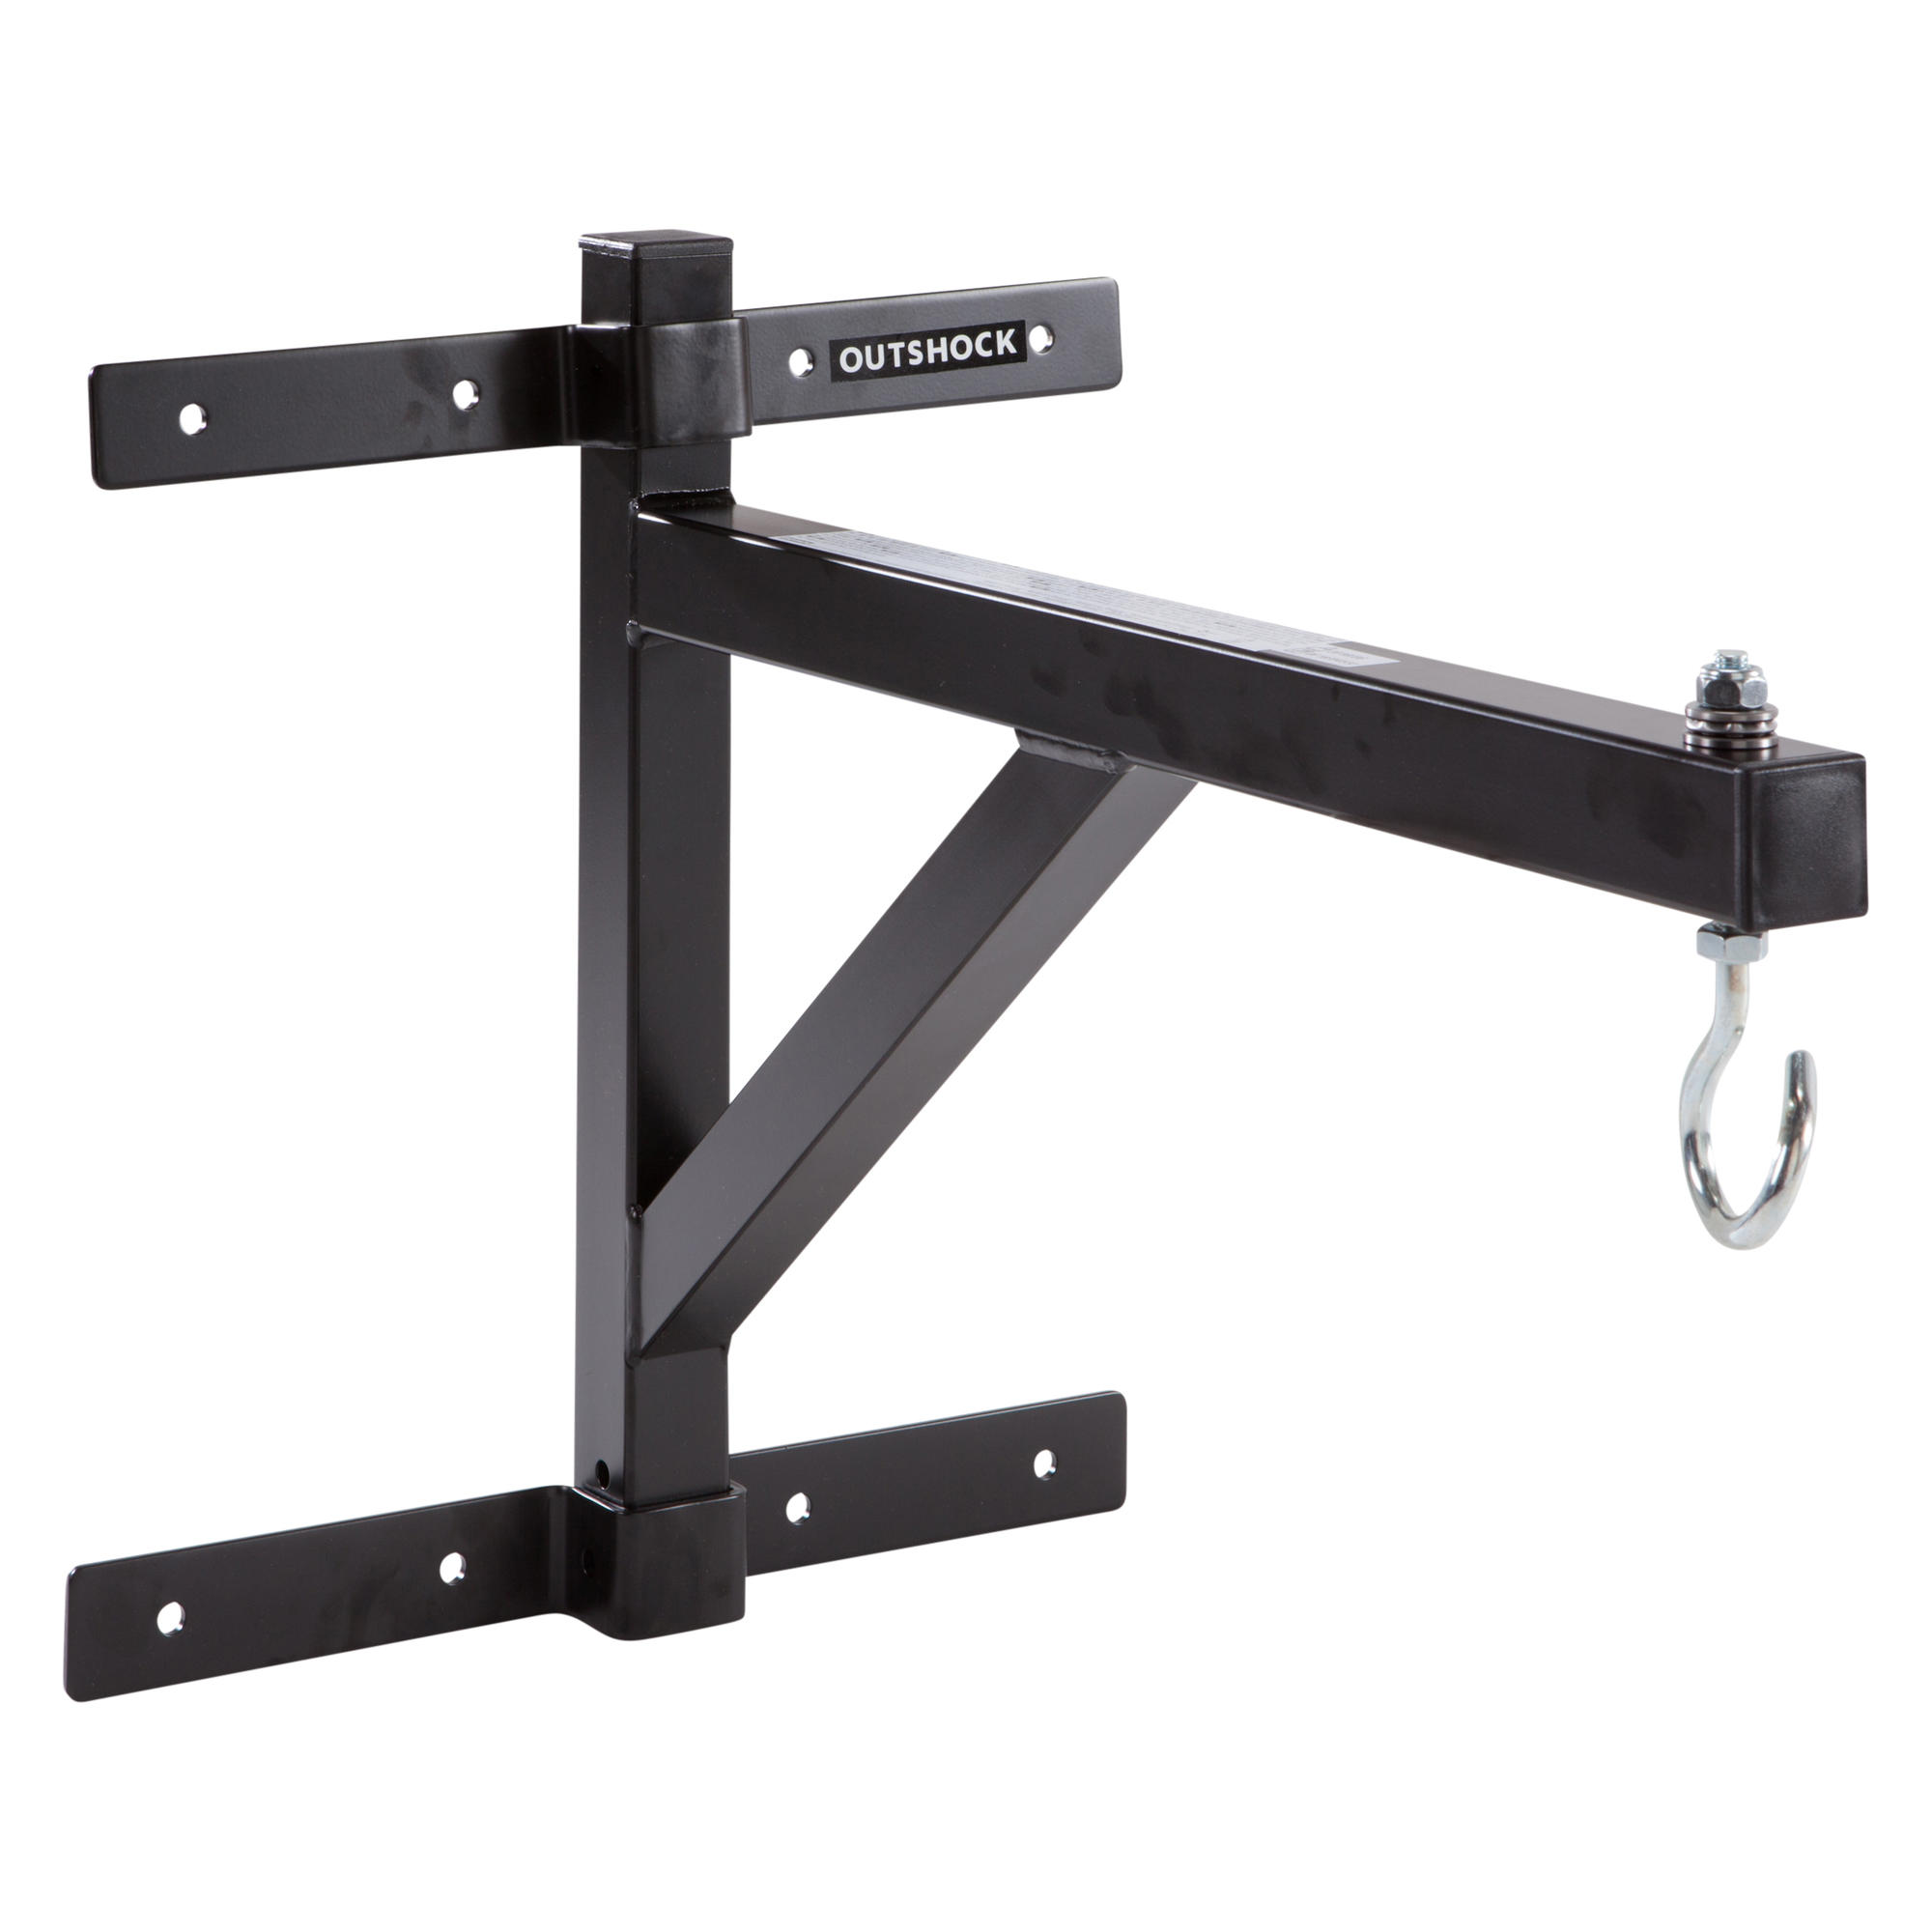 boxing stand decathlon